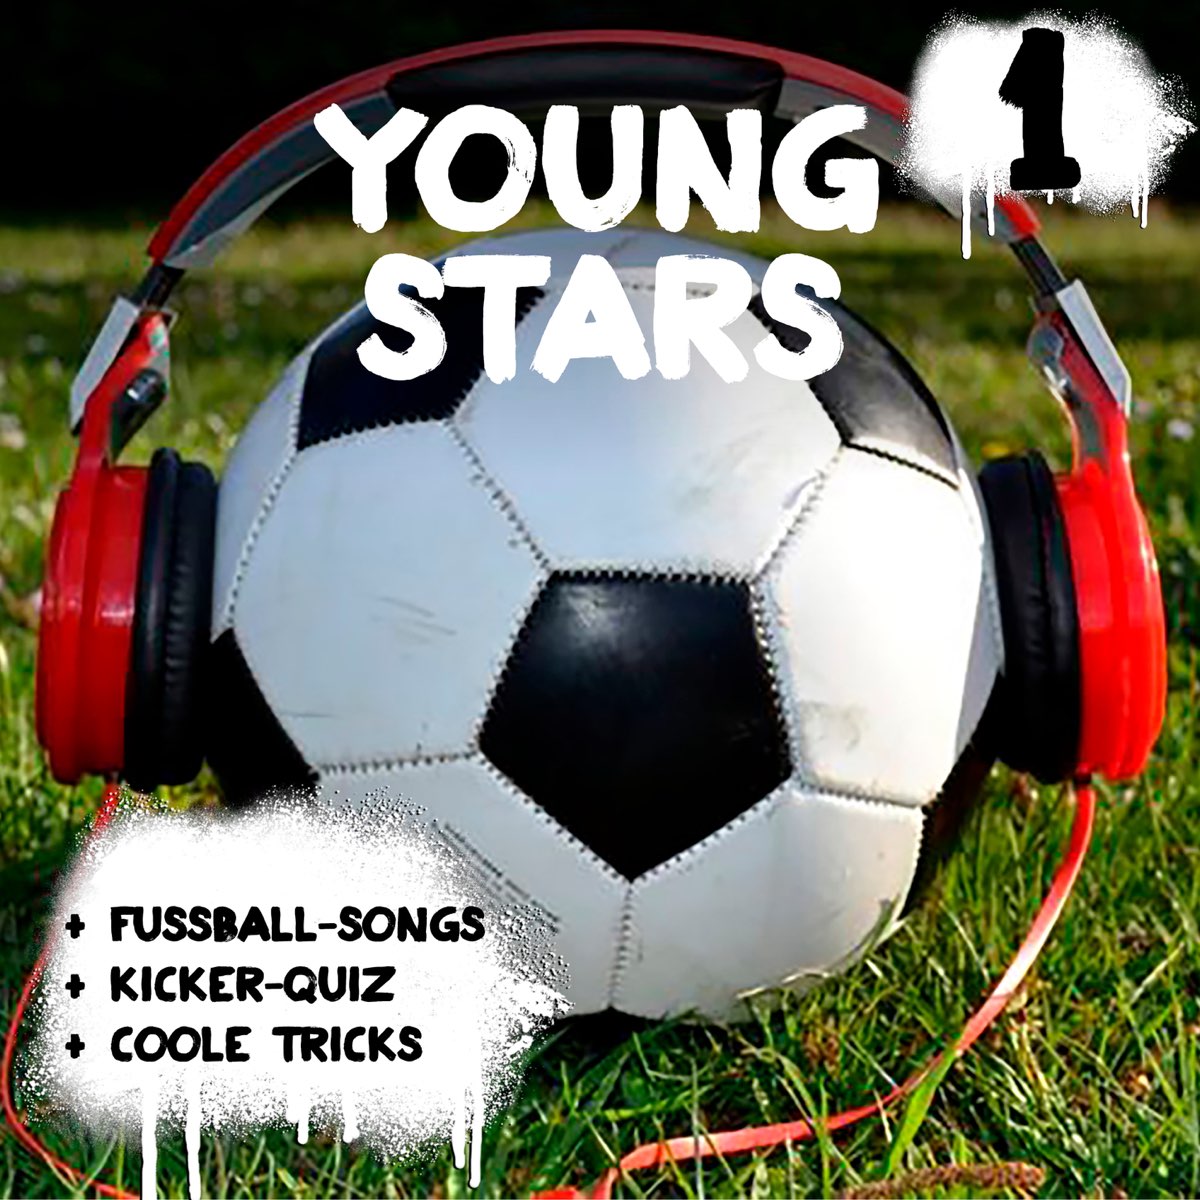 Young Stars - Fussball-Songs + Kicker-Quiz + coole Tricks 1 (Hörspiel) by  Peter Huber on Apple Music